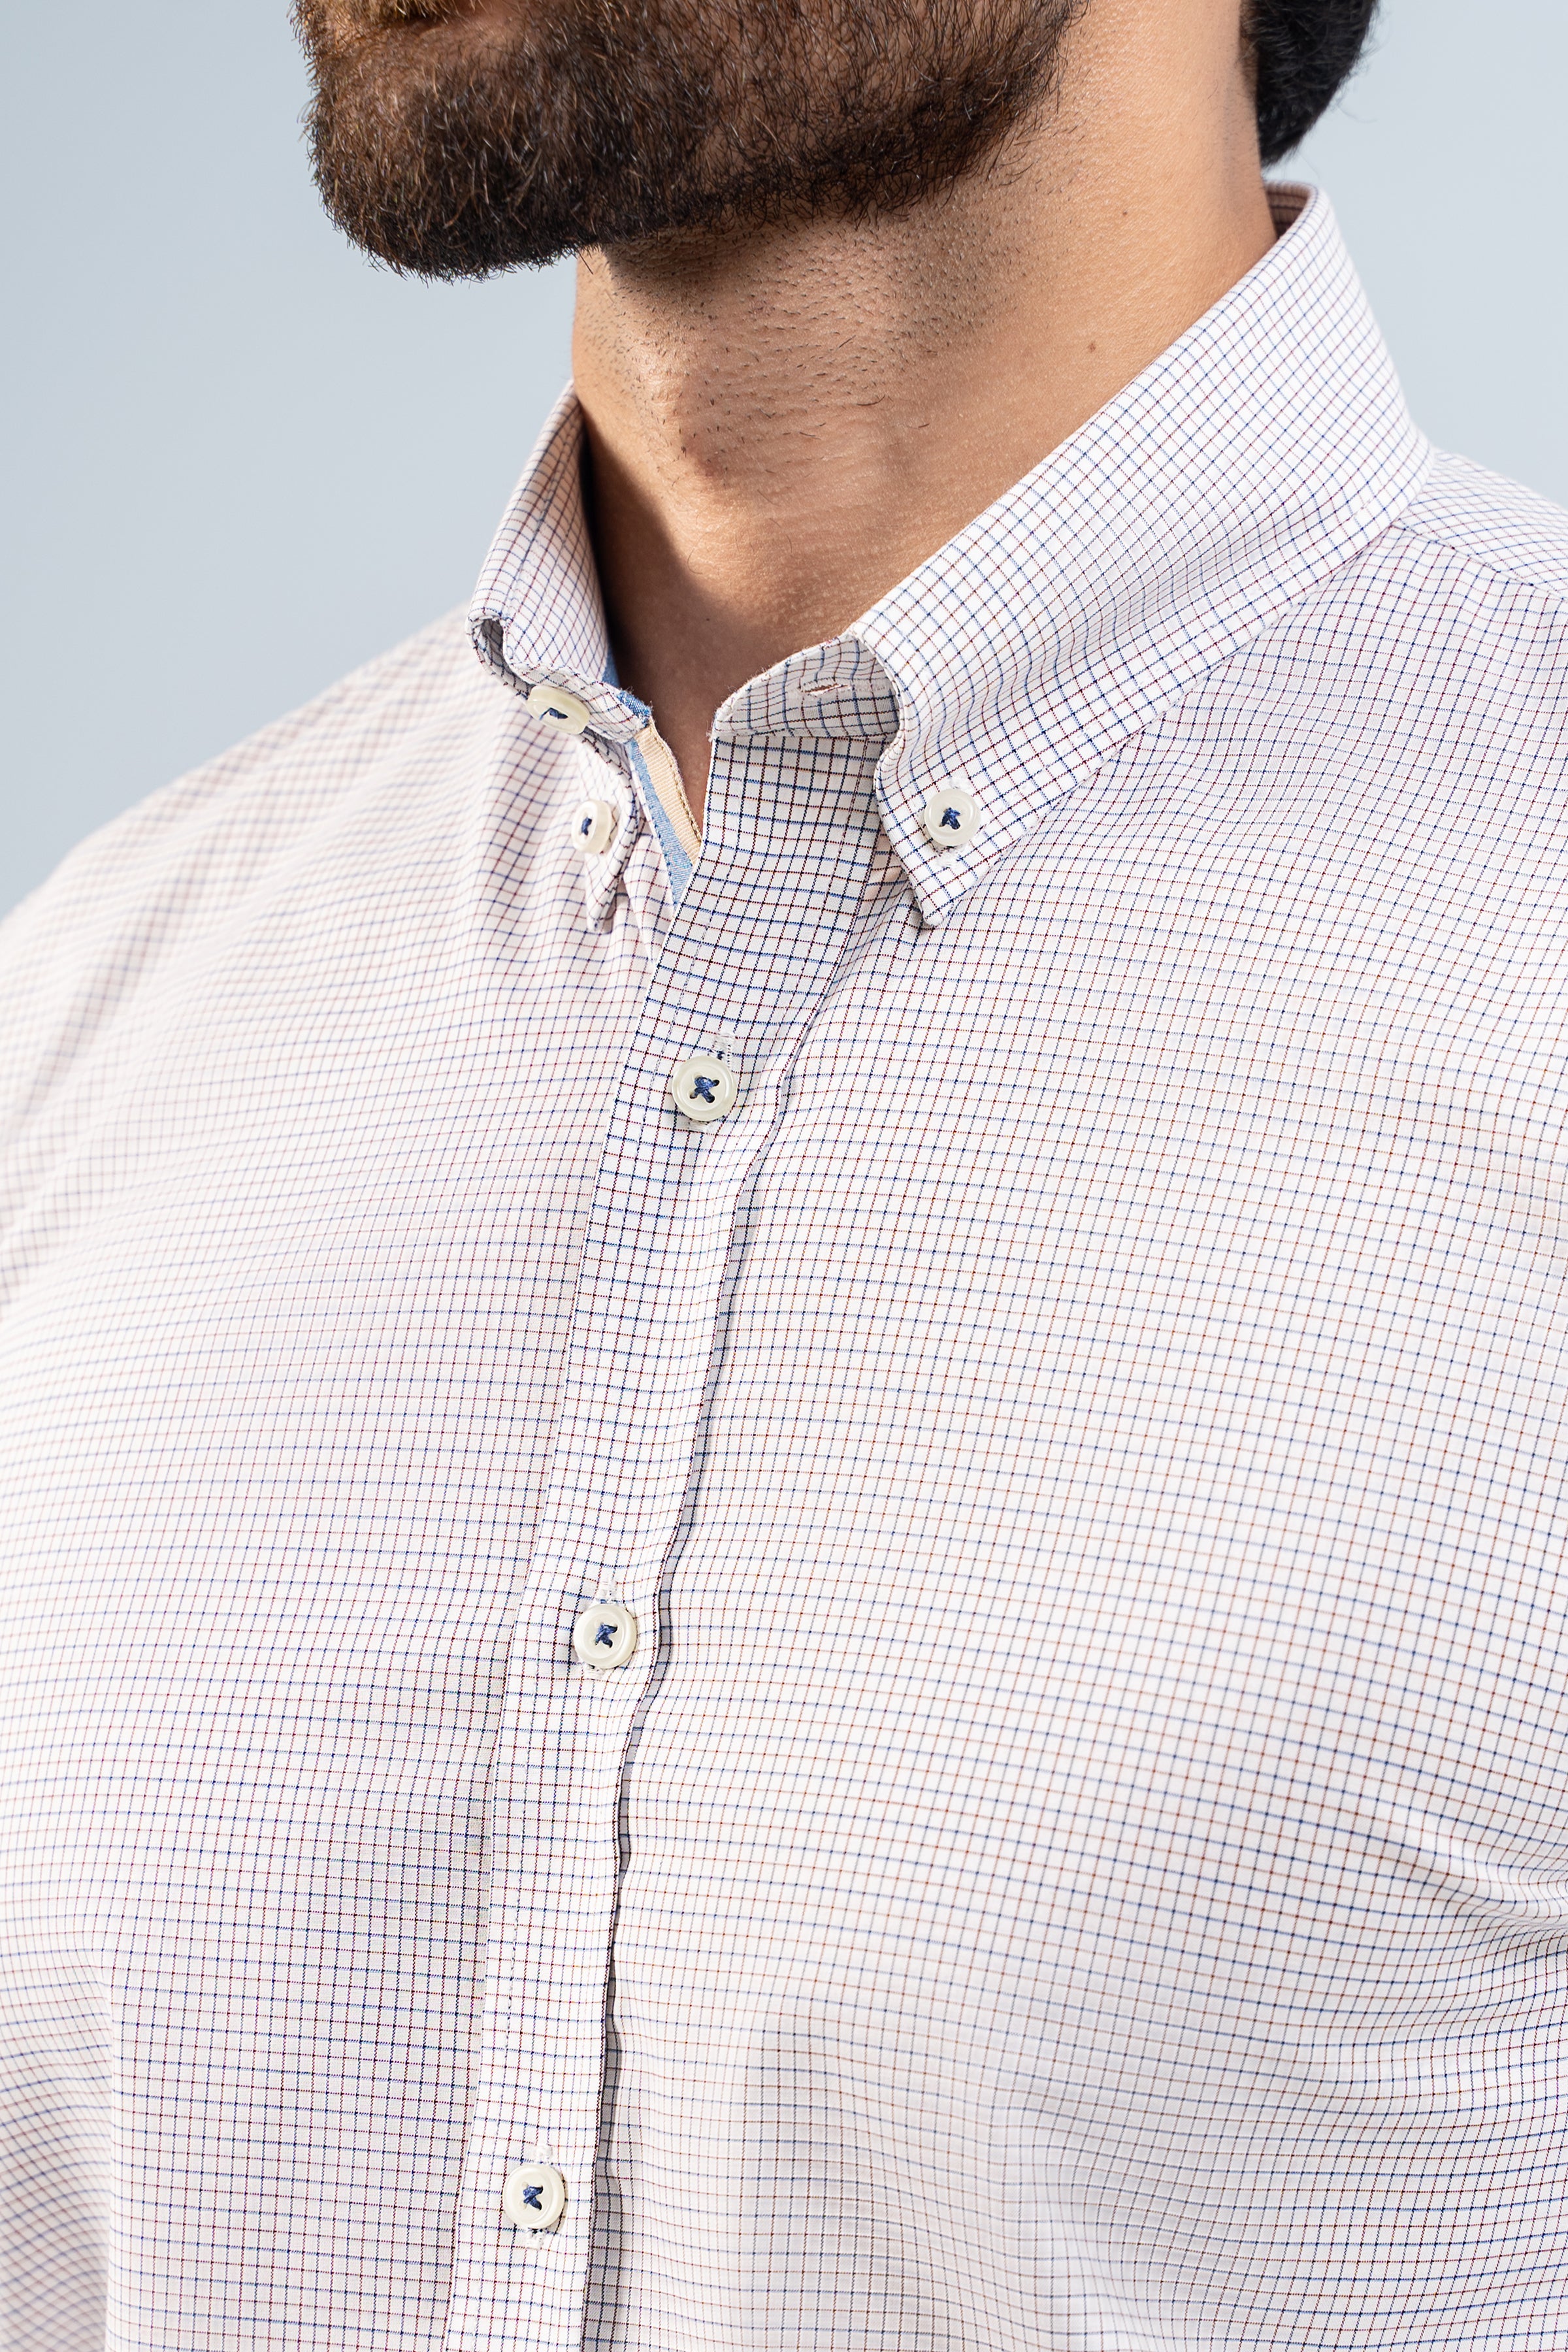 SEMI FORMAL SHIRTS OFF WHITE CHECK - Charcoal Clothing